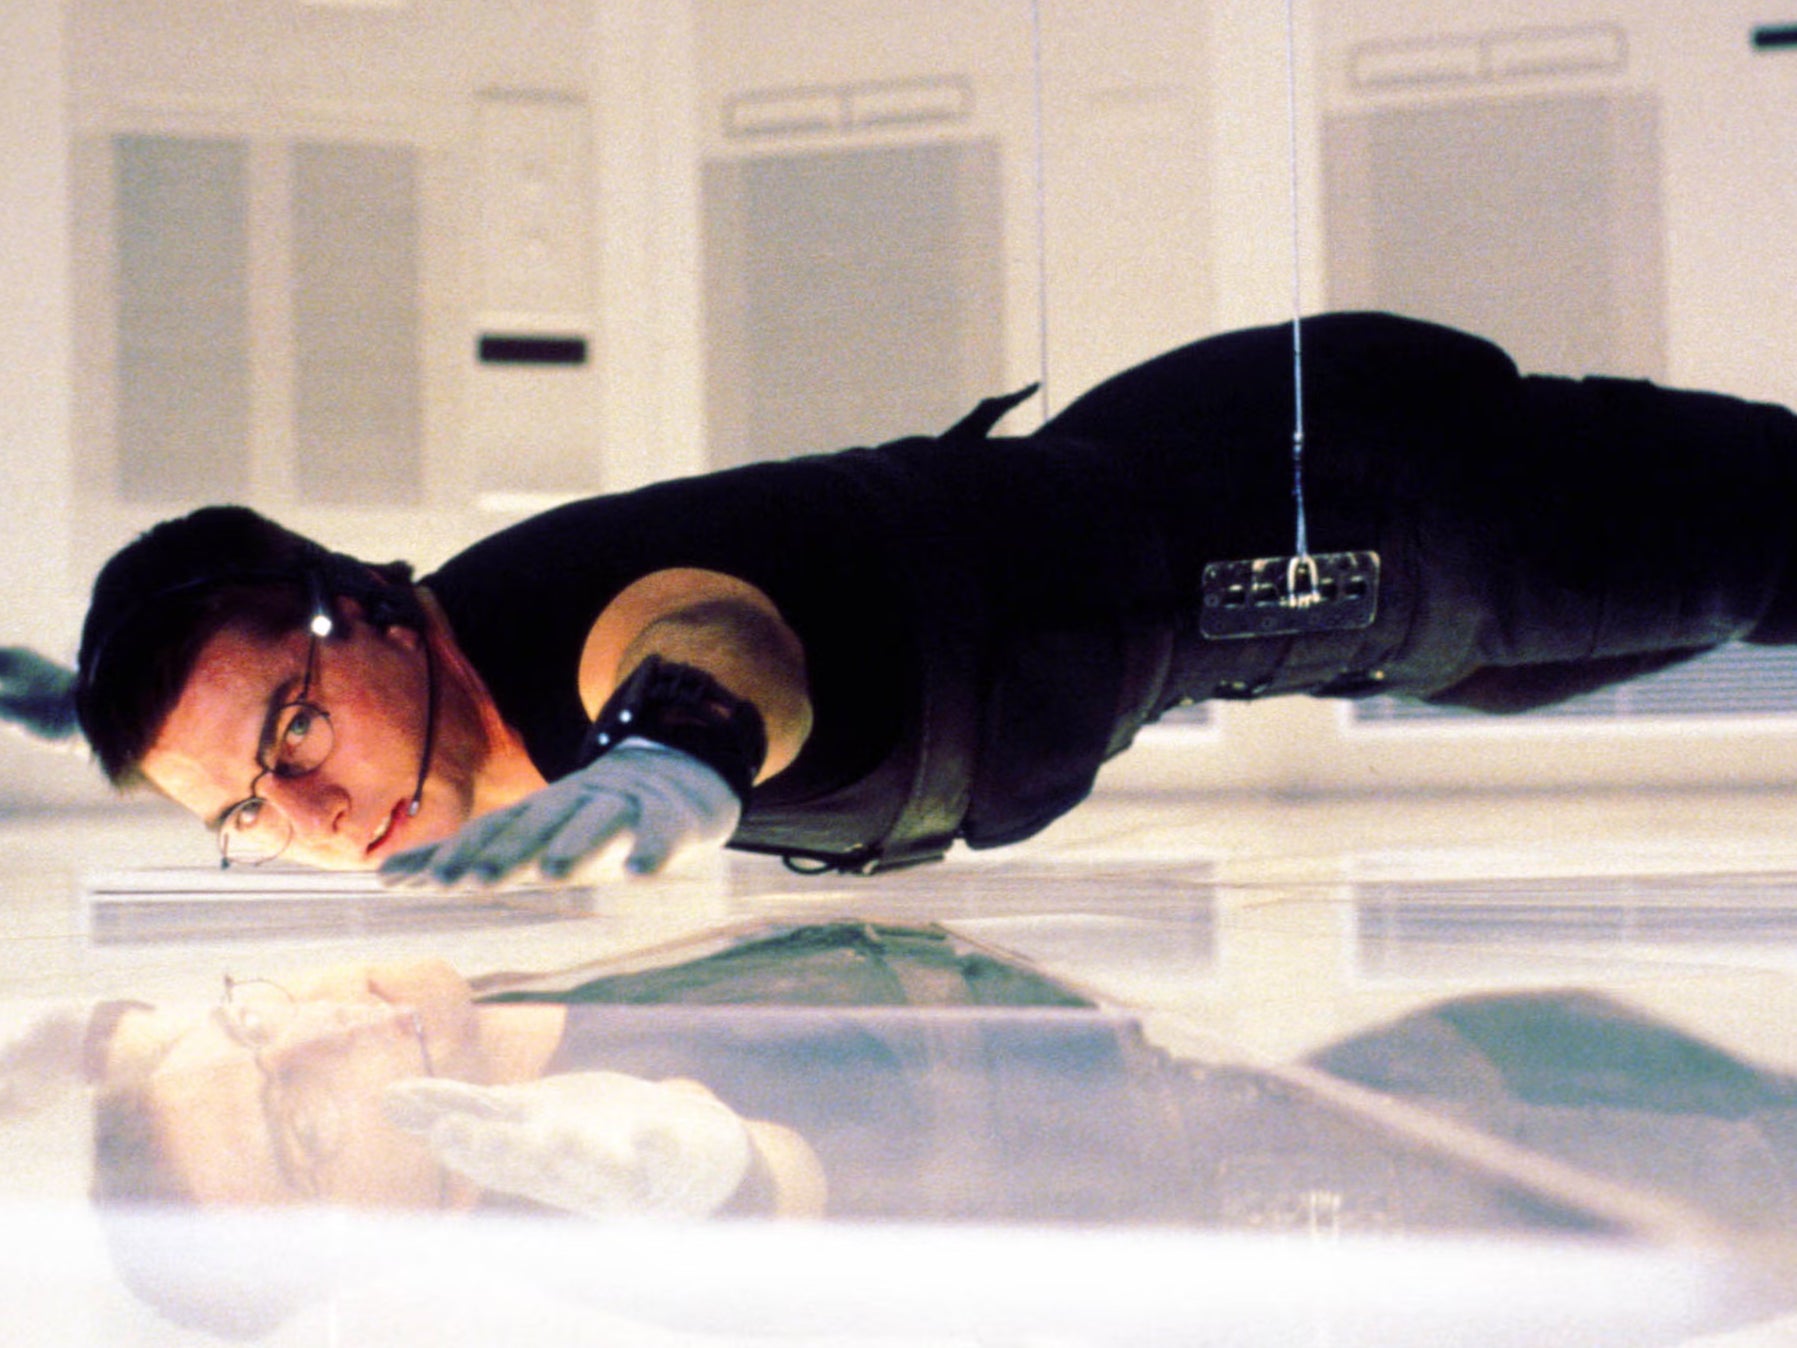 Tom Cruise as Ethan Hunt in the first ‘Mission: Impossible’ film in 1996